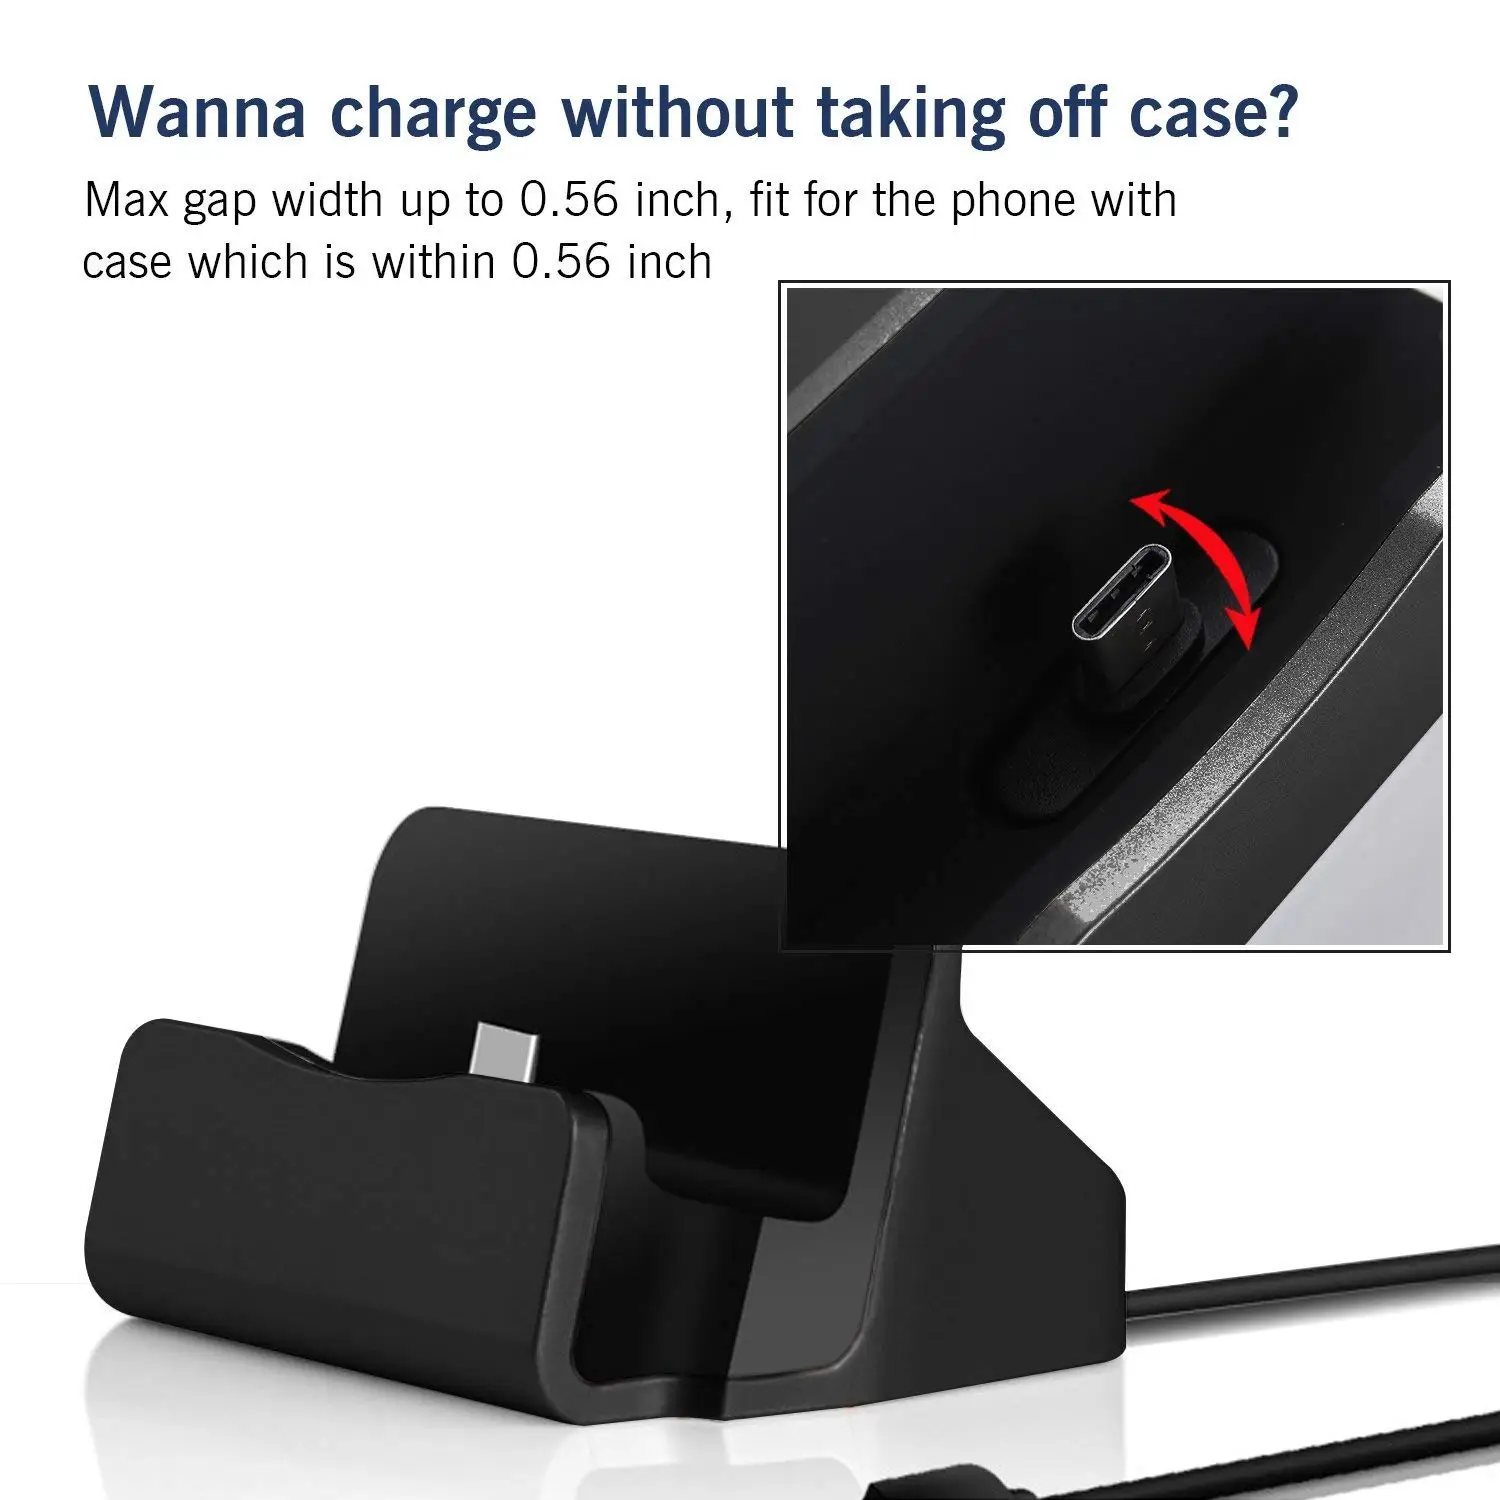 Fast Phone Charging Dock Station USB Data Cable For iPhone Huawei Xiaomi LG Samsung Micro-USB/Type-C/IOS Desktop Docking Charger